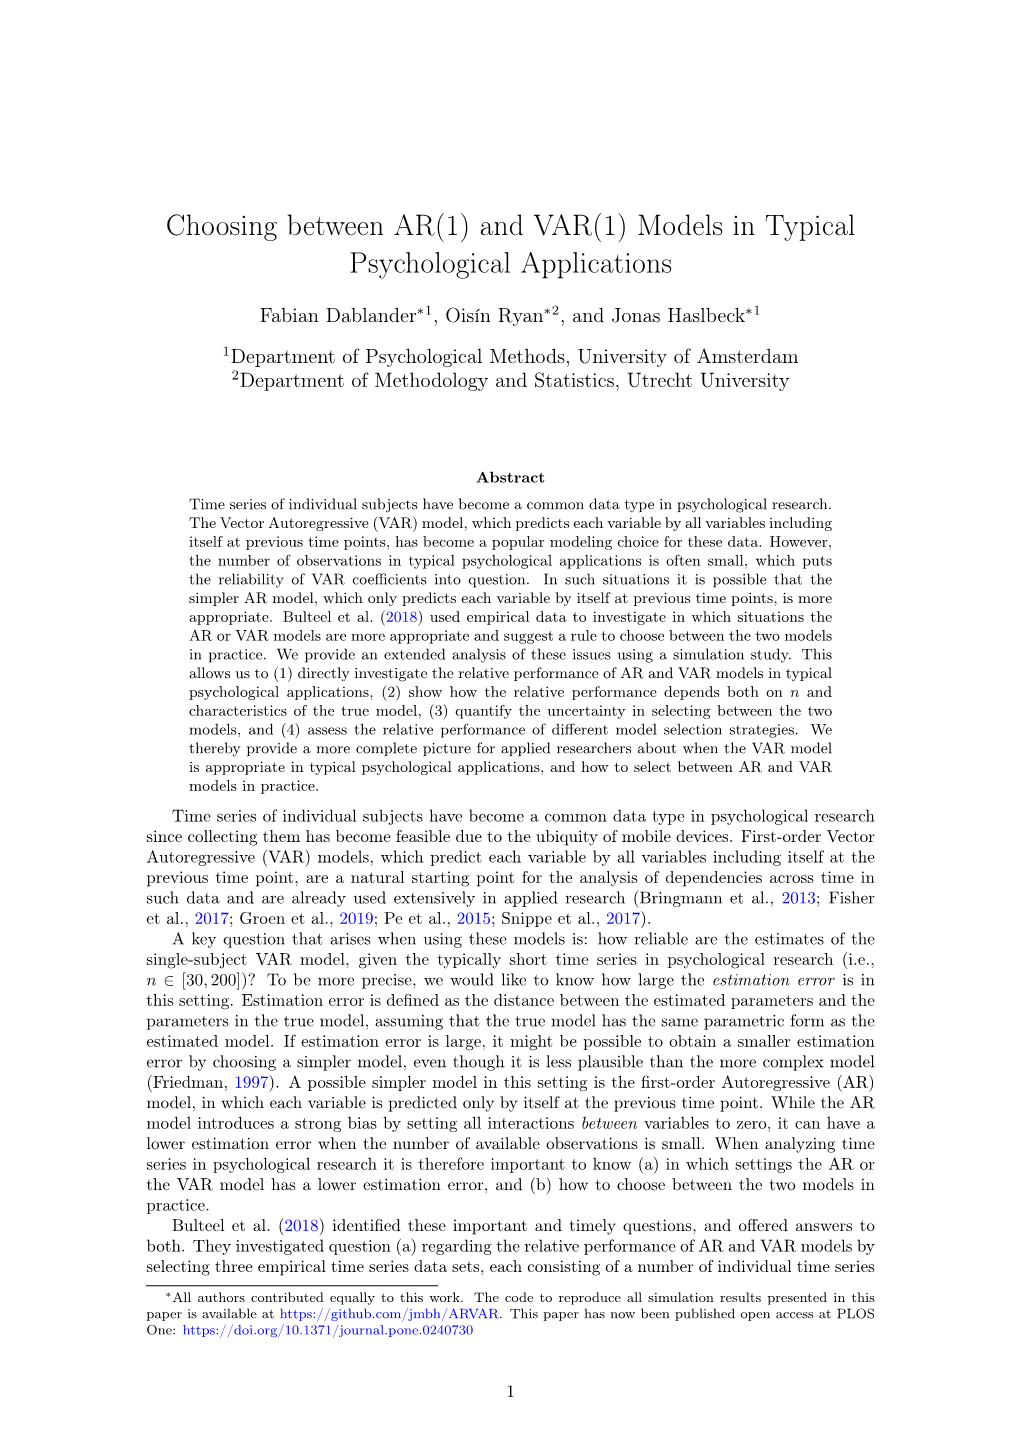 Choosing Between AR(1) and VAR(1) Models in Typical Psychological Applications